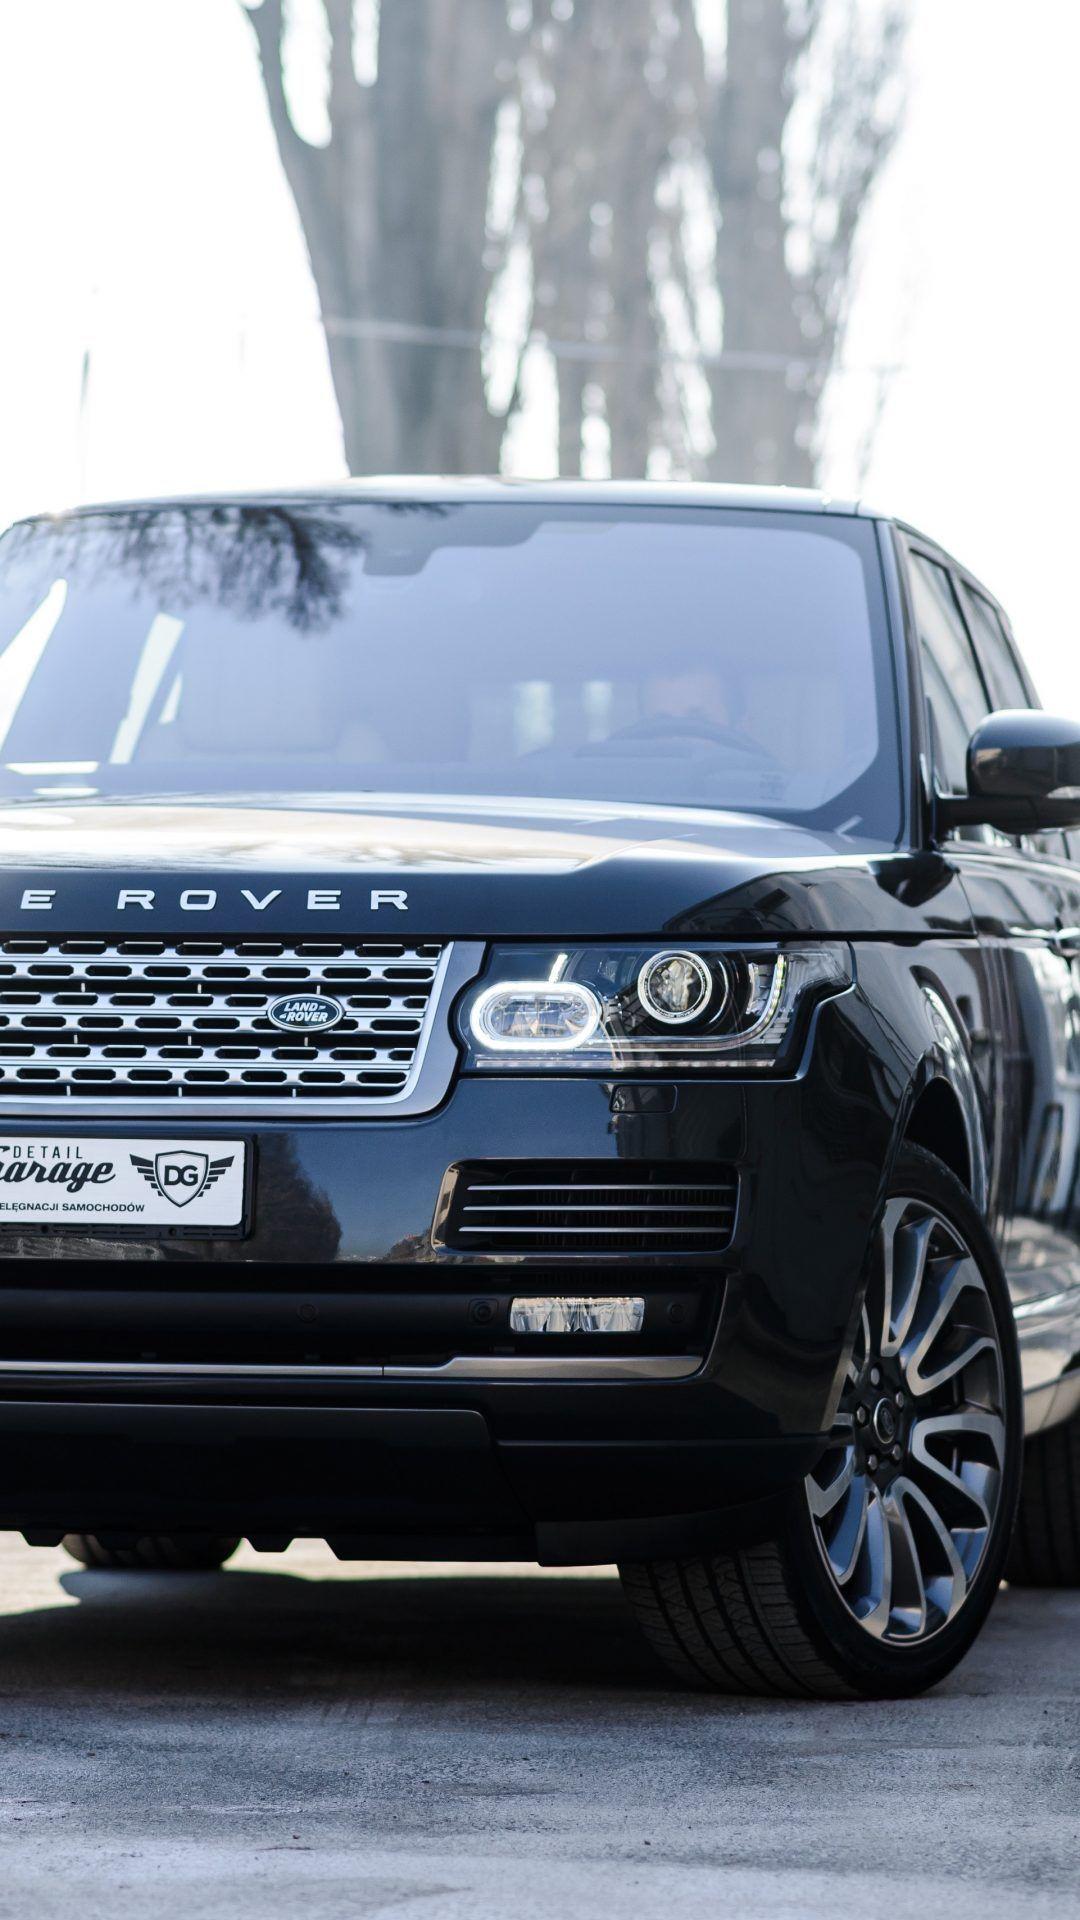 Range Rover Wallpapers For Mobile HD